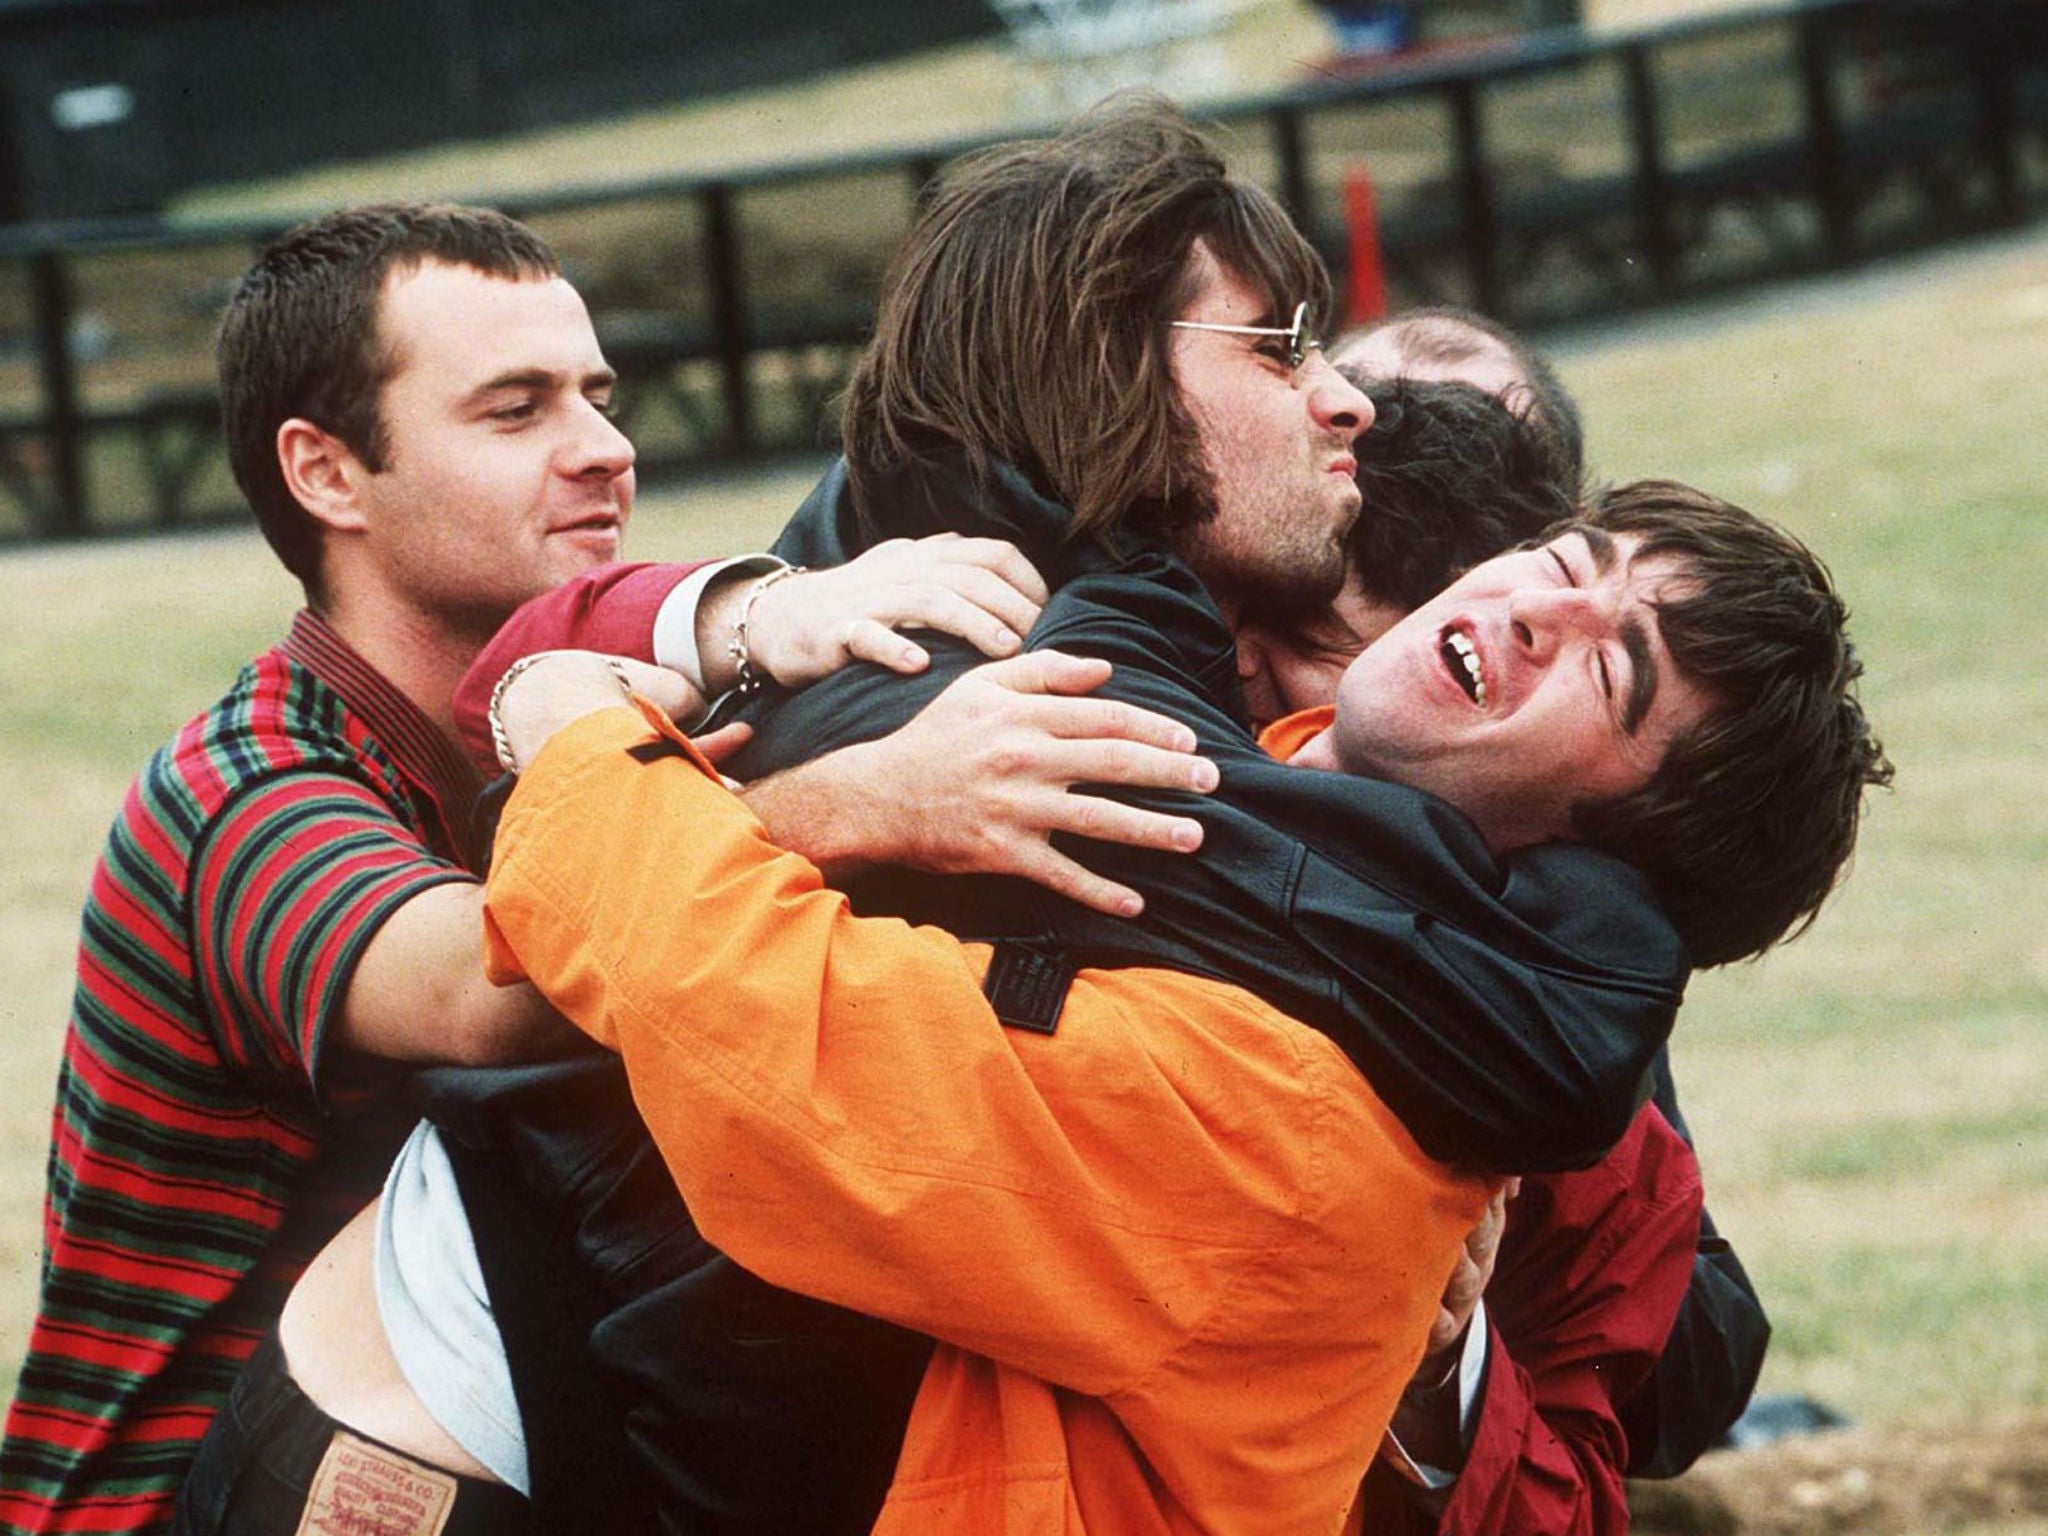 Oasis before their famous Knebworth gigs in 1996. Oh the bromance.